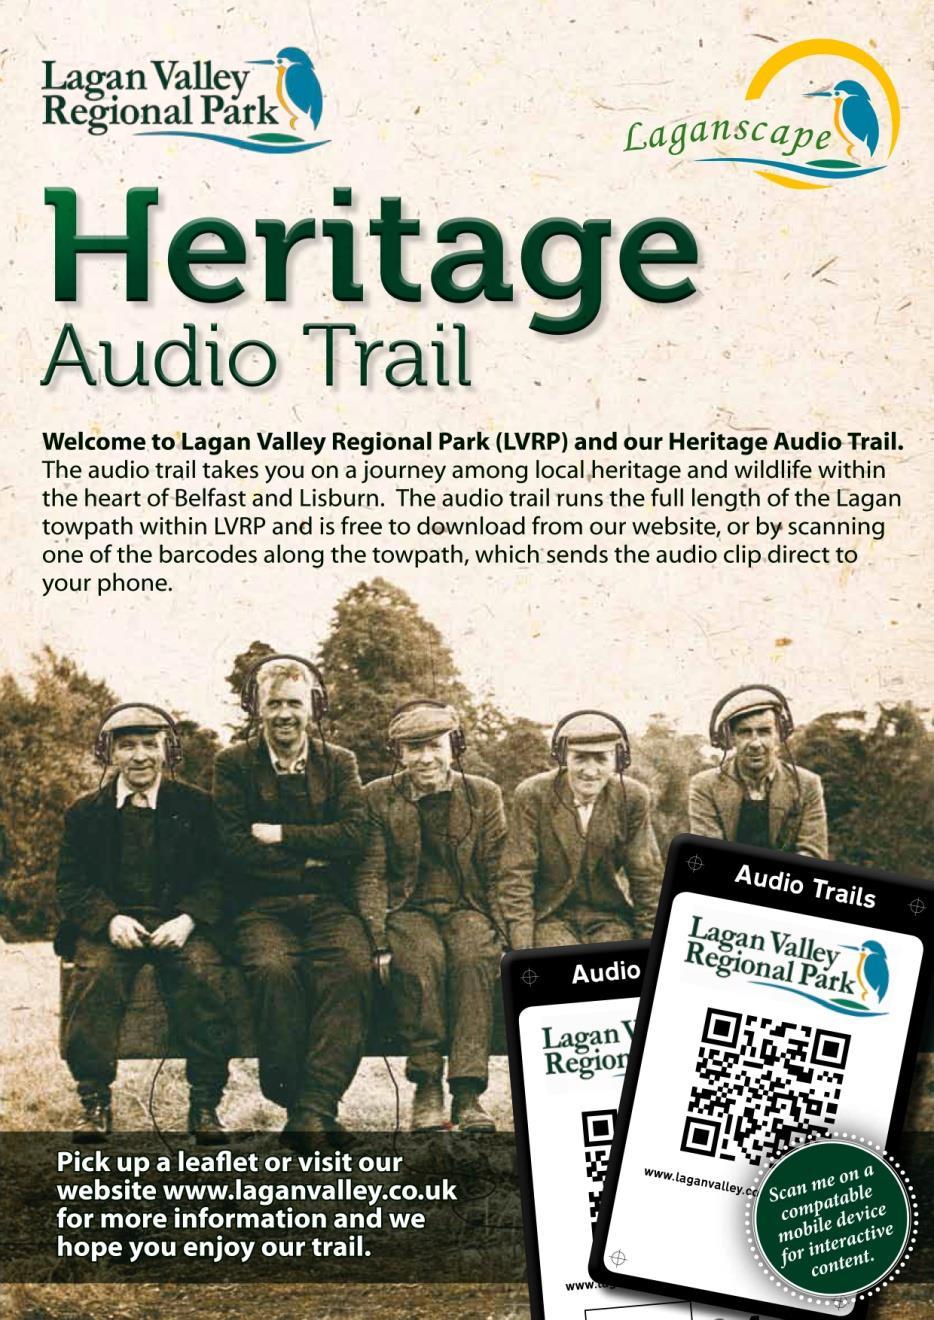 Audio Trail A heritage trail that